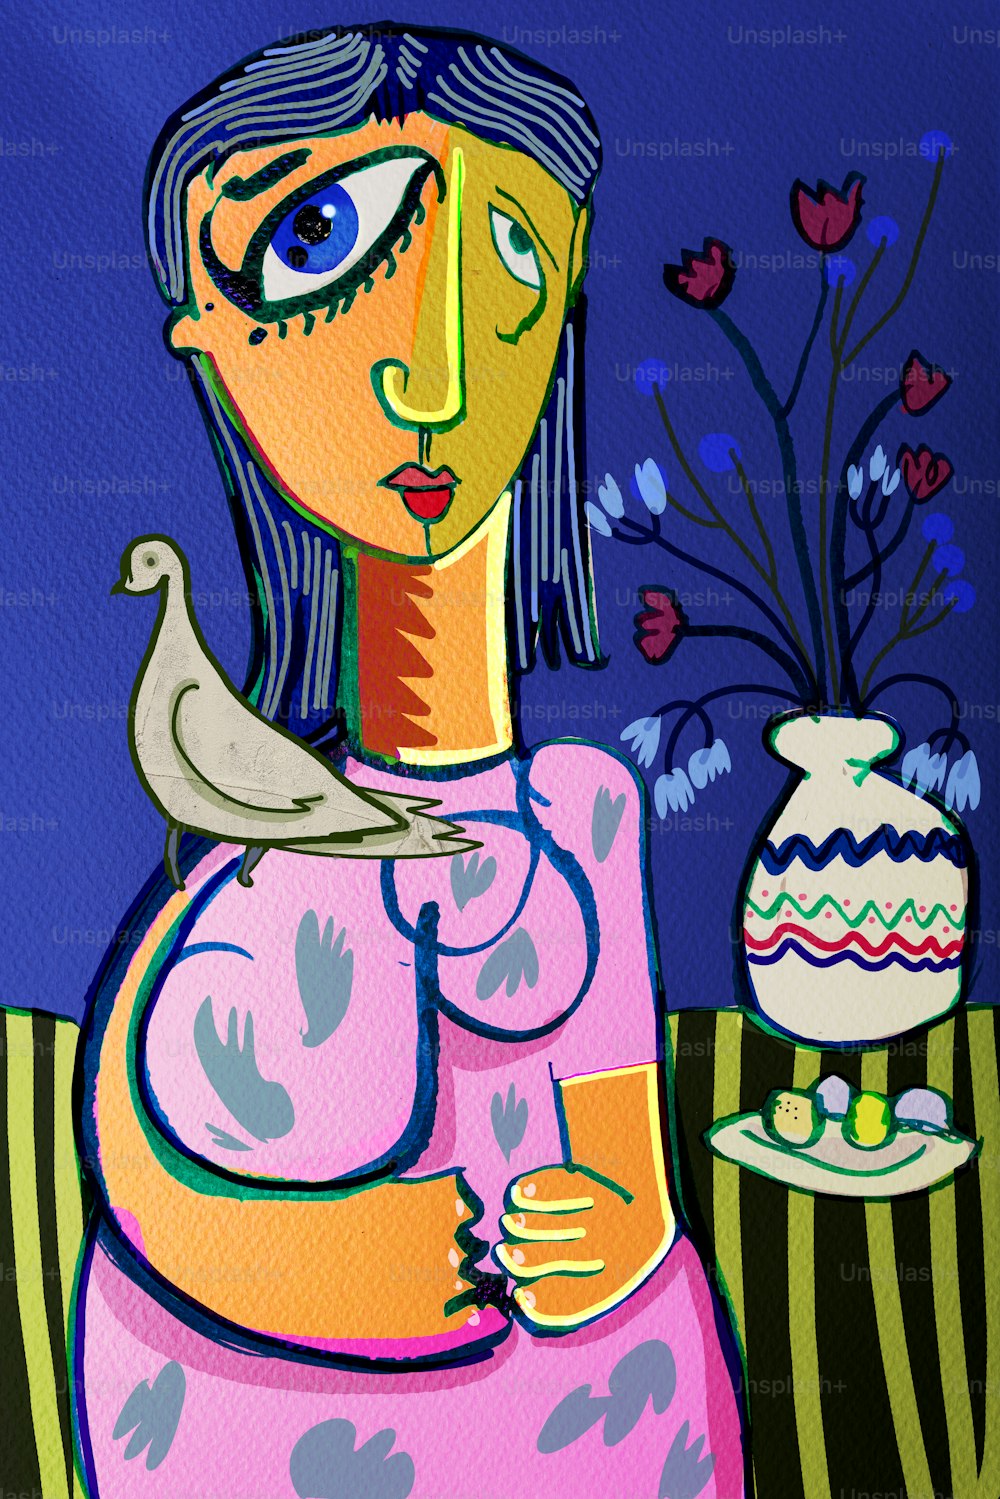 Portrait of a woman drawn in cubist style with a white dove of peace